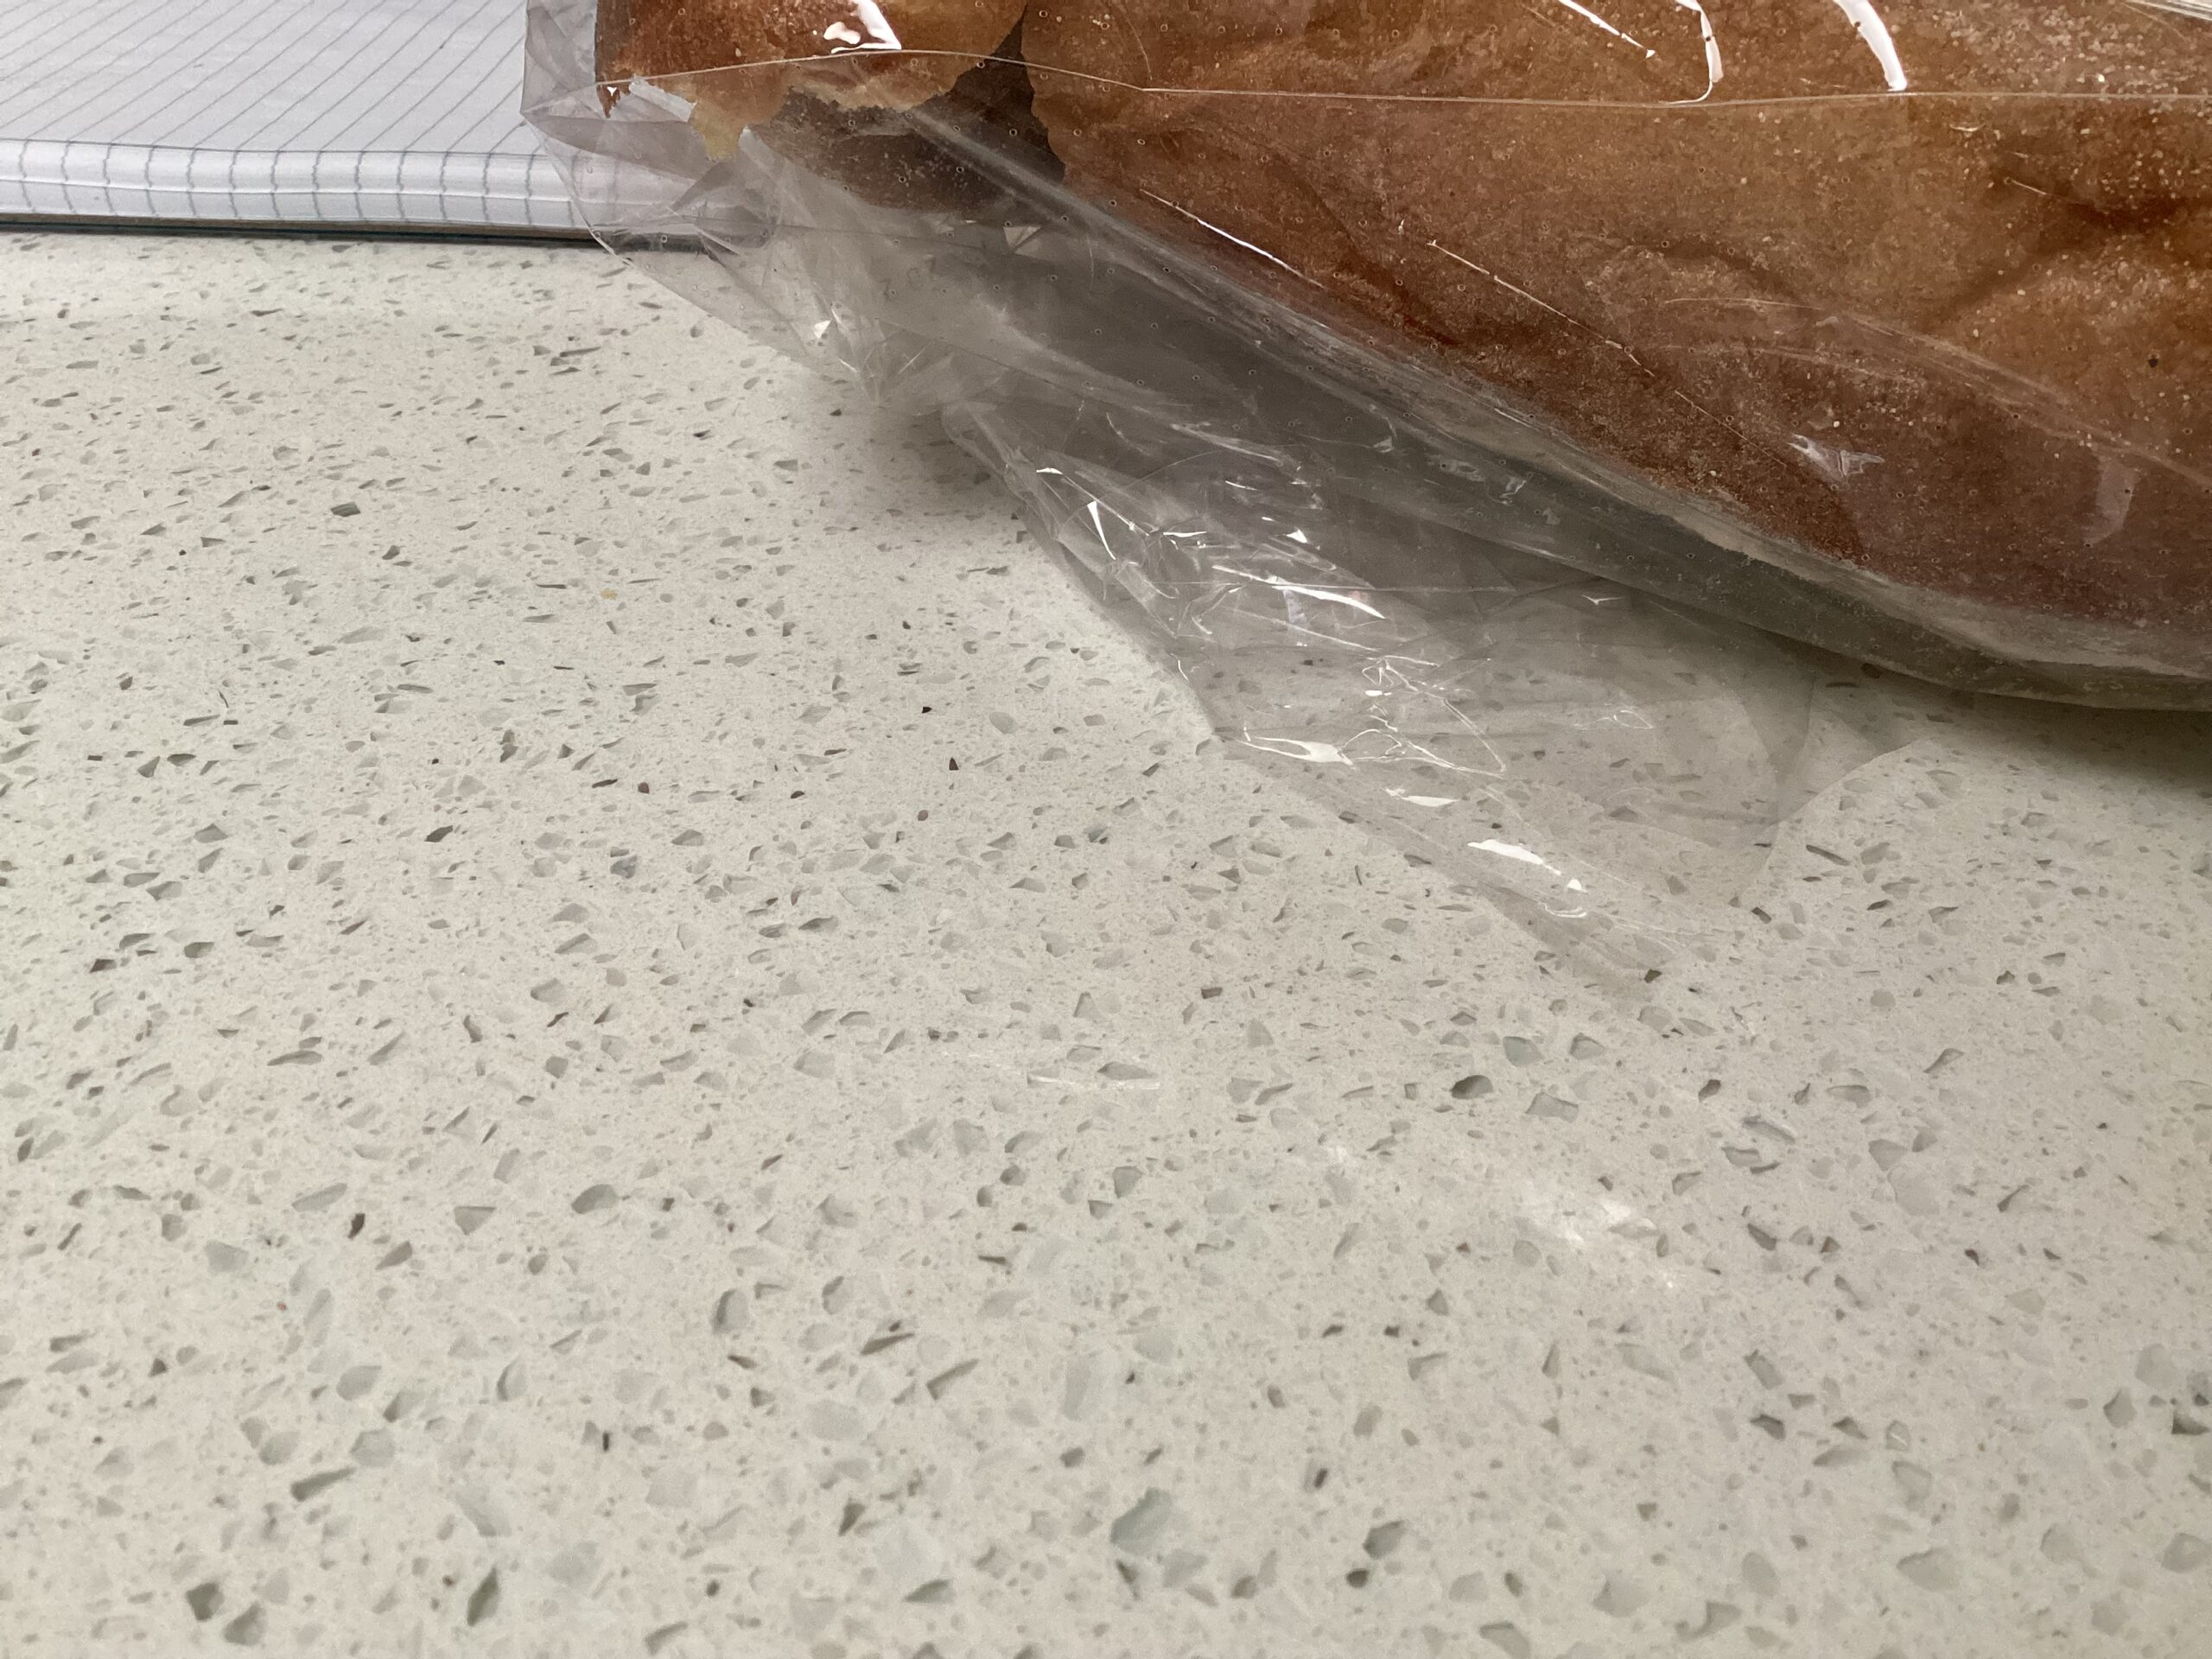 Sly shot of uneaten bread at my clients’ kitchen